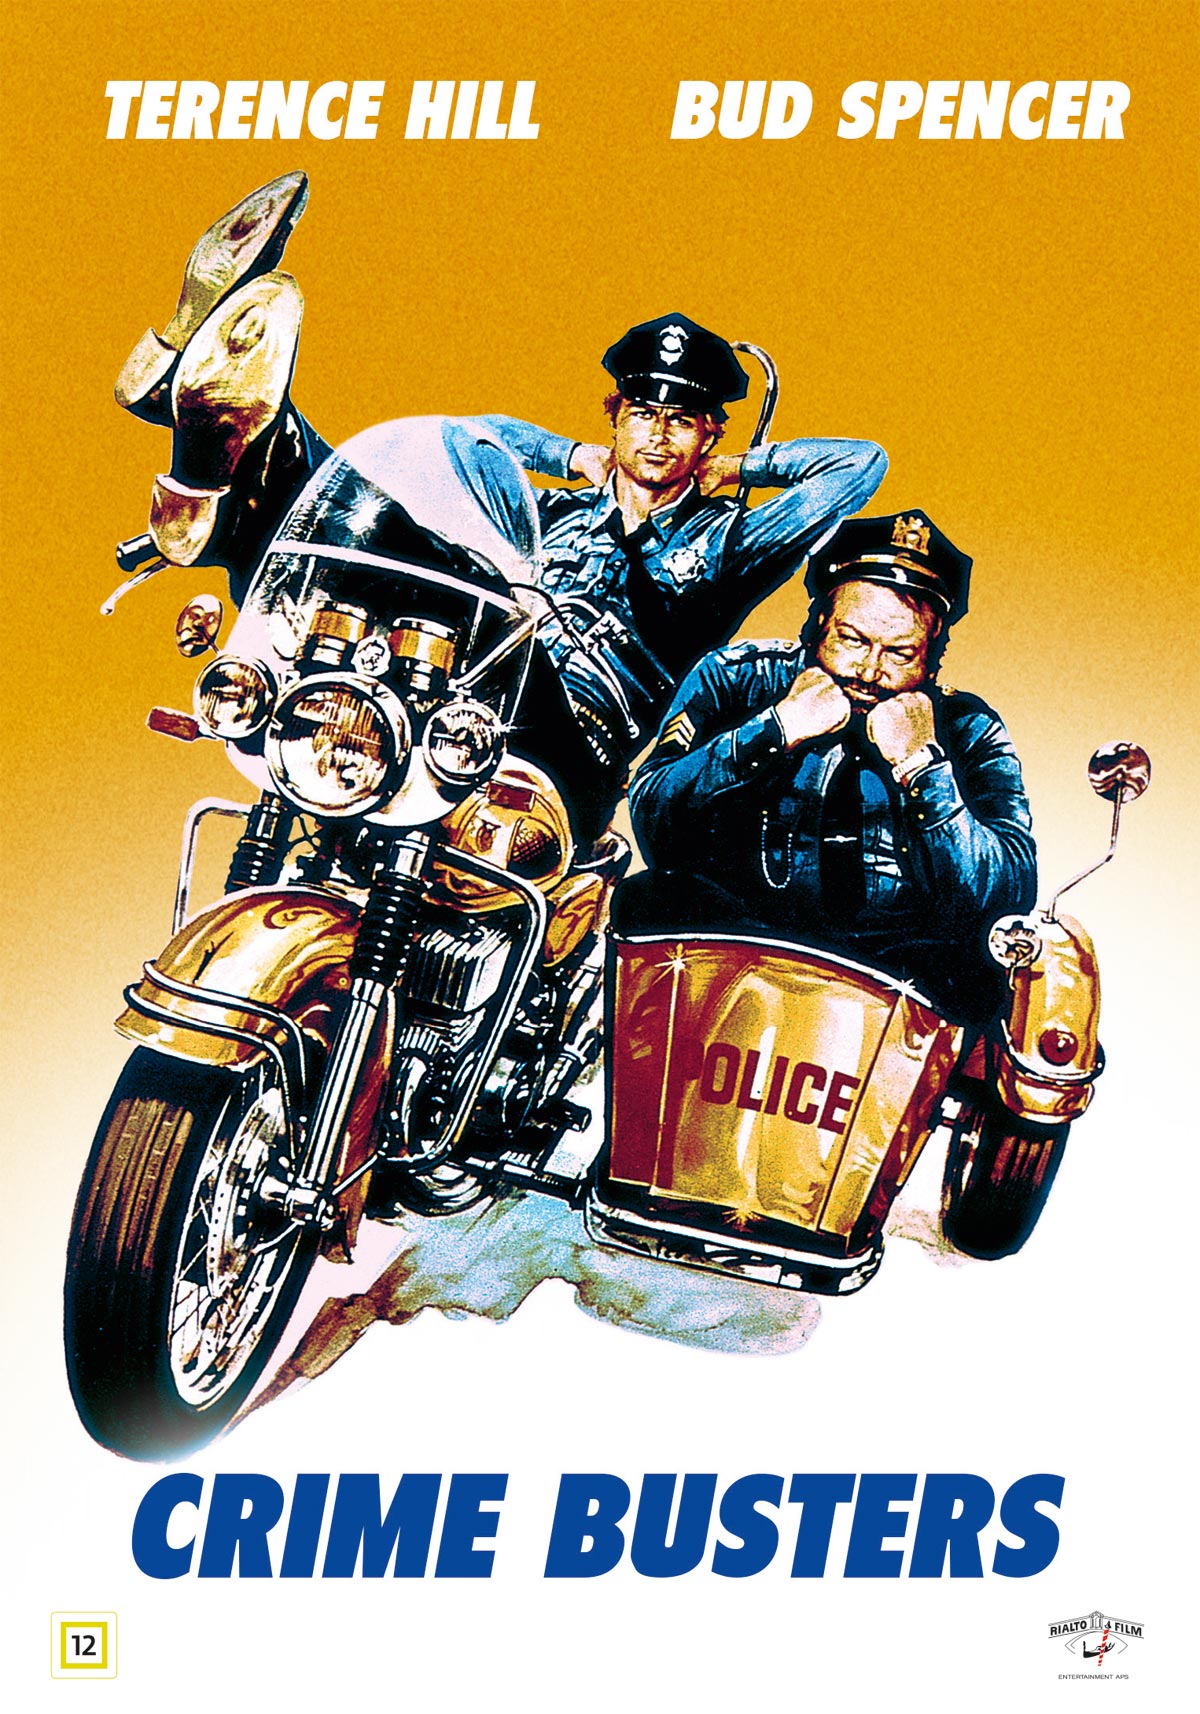 Crime busters (Terence Hill/Bud Spencer)